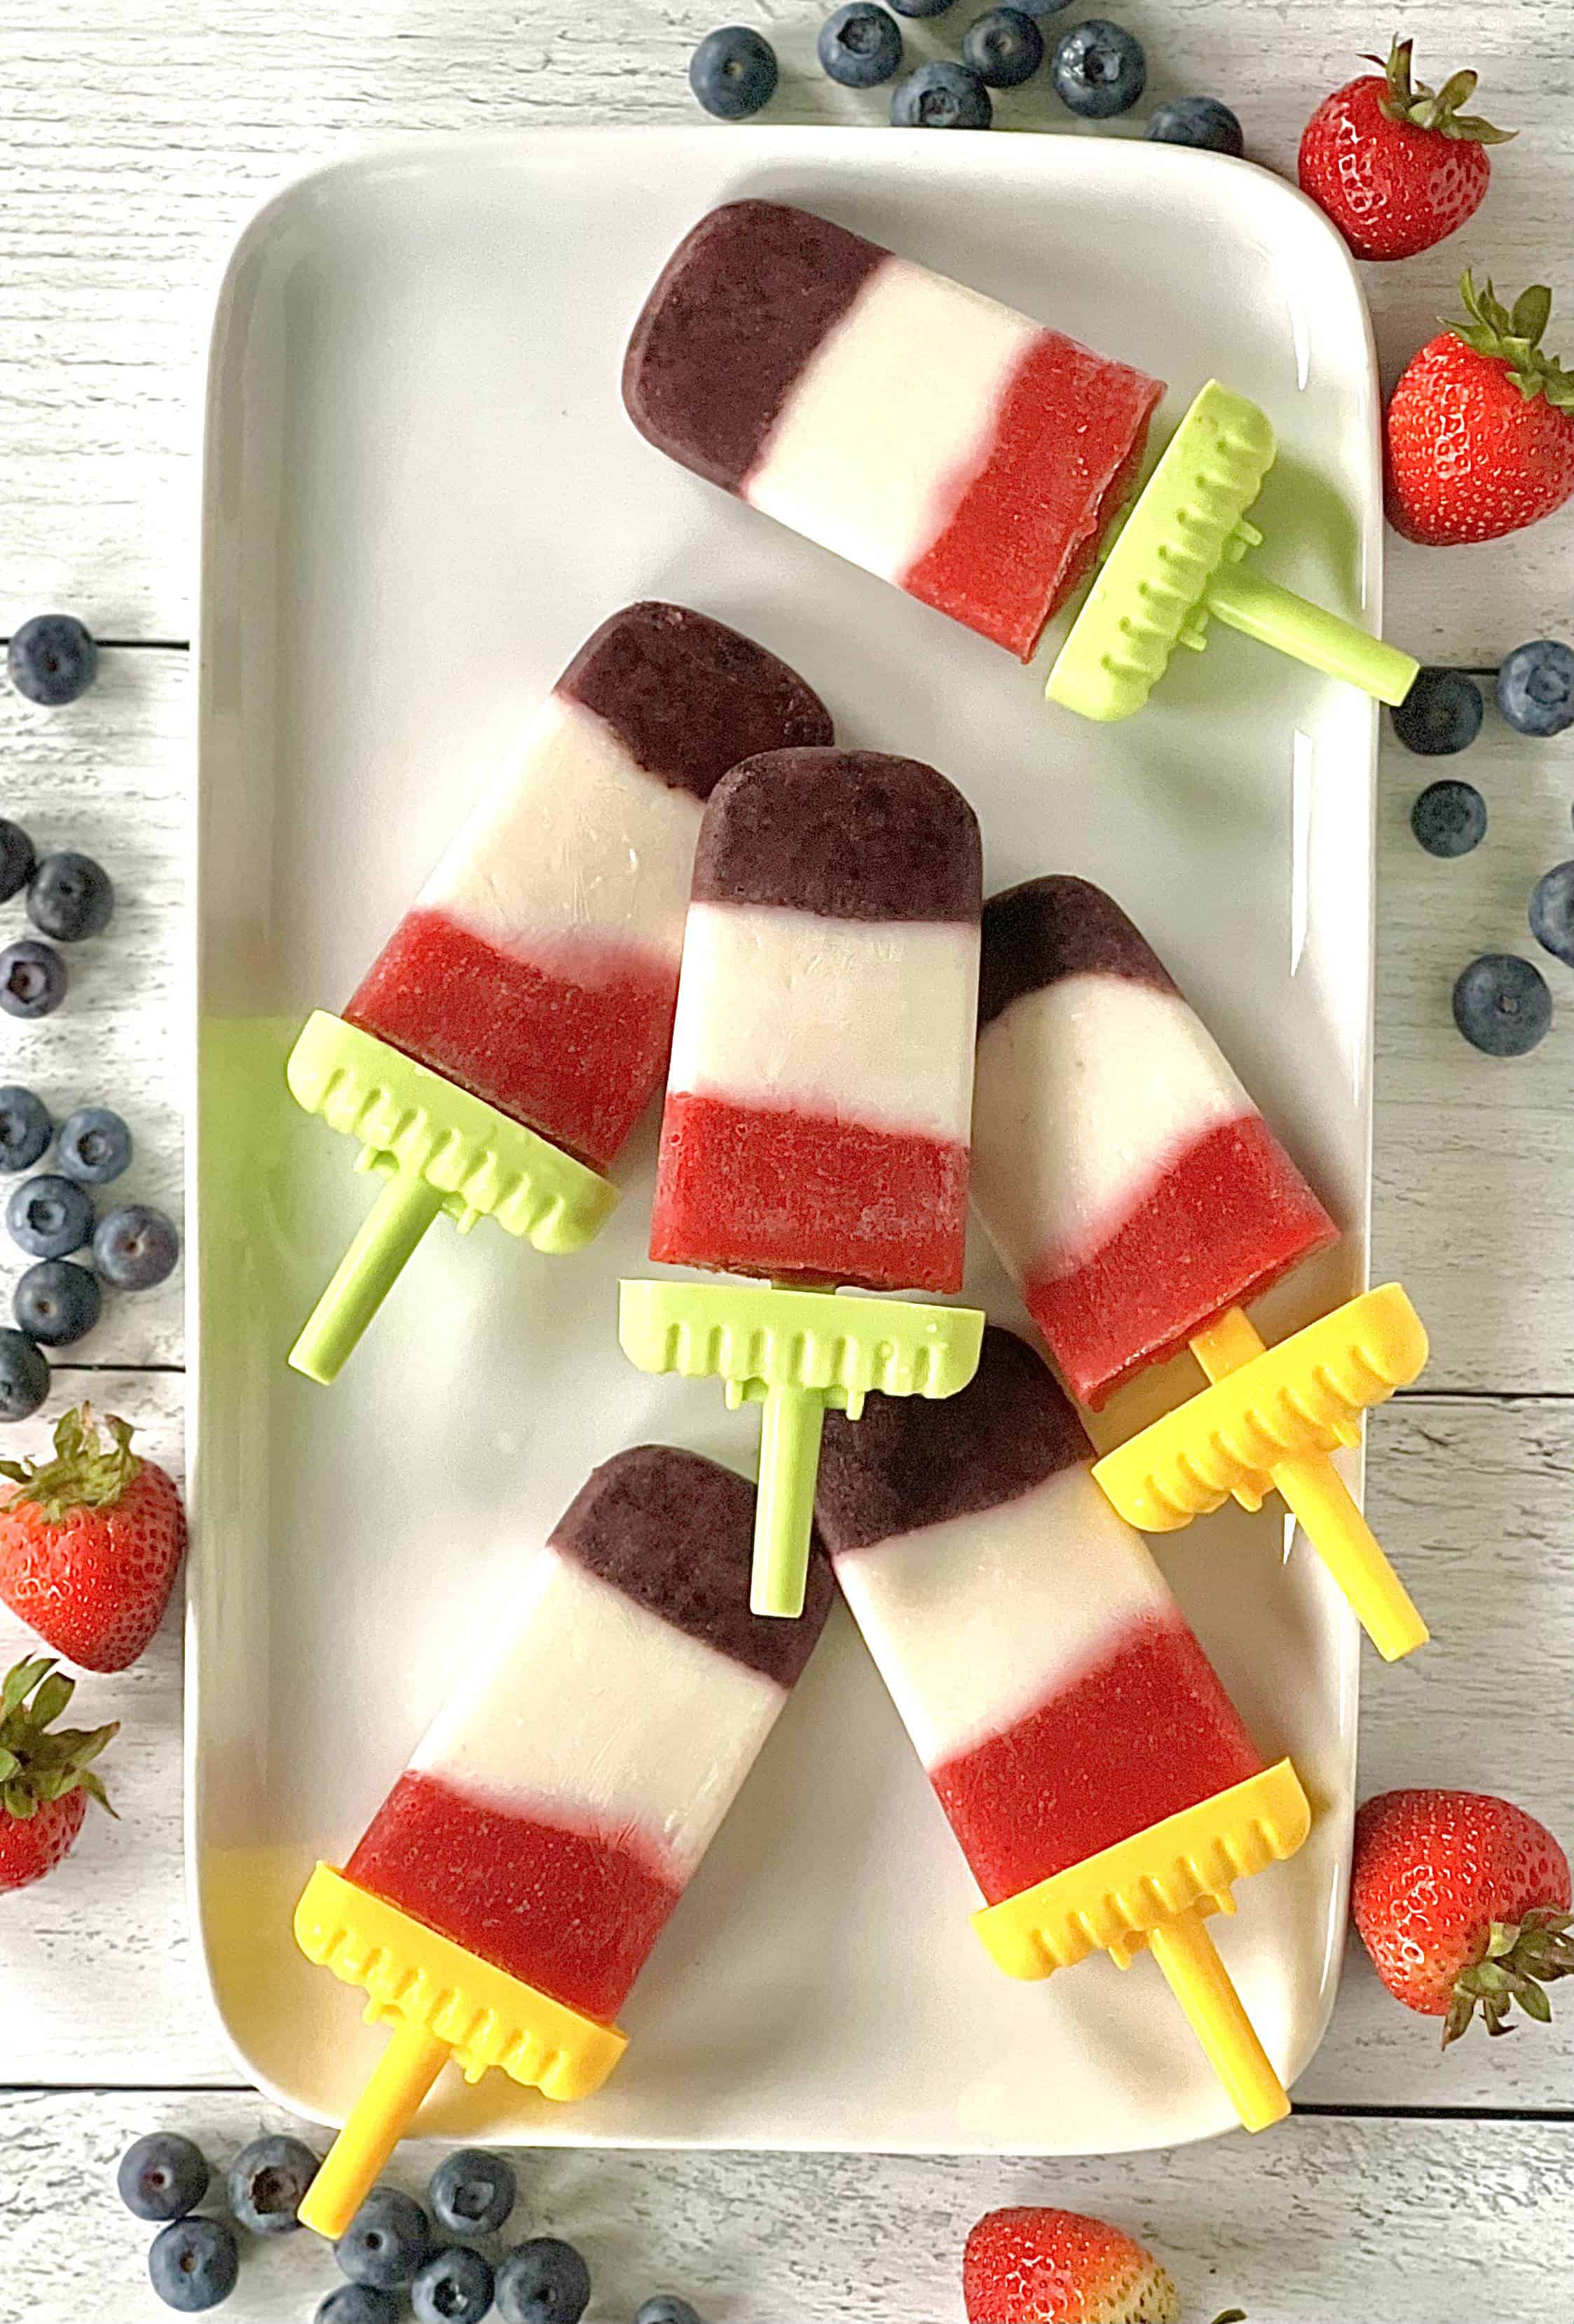 healthy homemade popsicles with layers of blueberries, strawberries and yogurt on a white platter surrounded by blueberries and strawberries